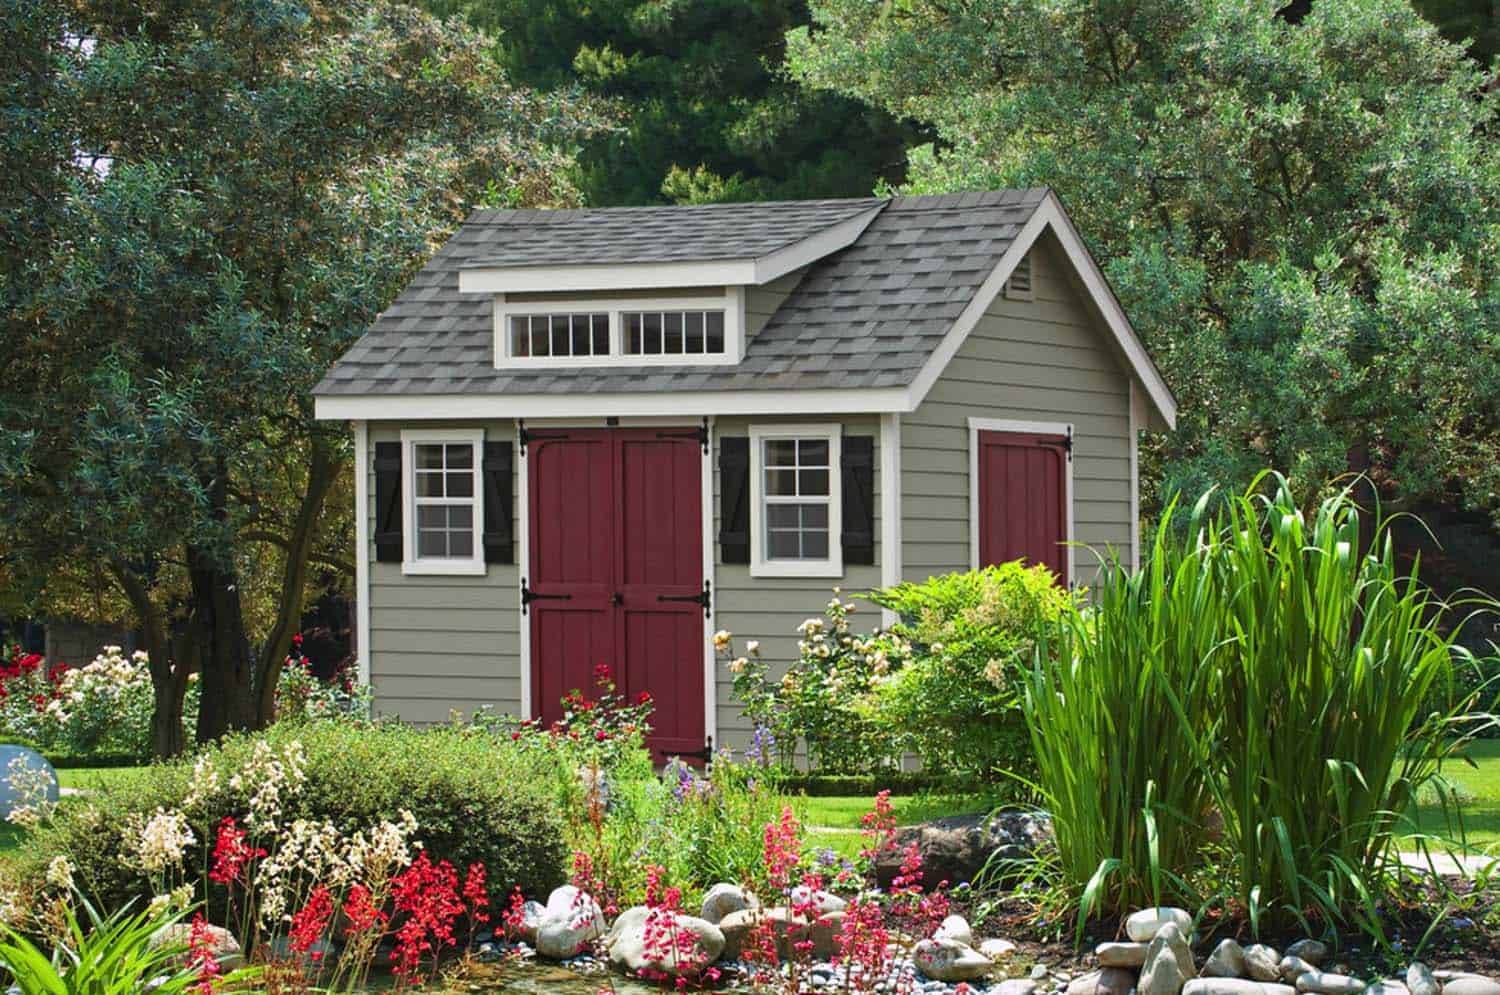 Town Gardens Painted Garden Sheds